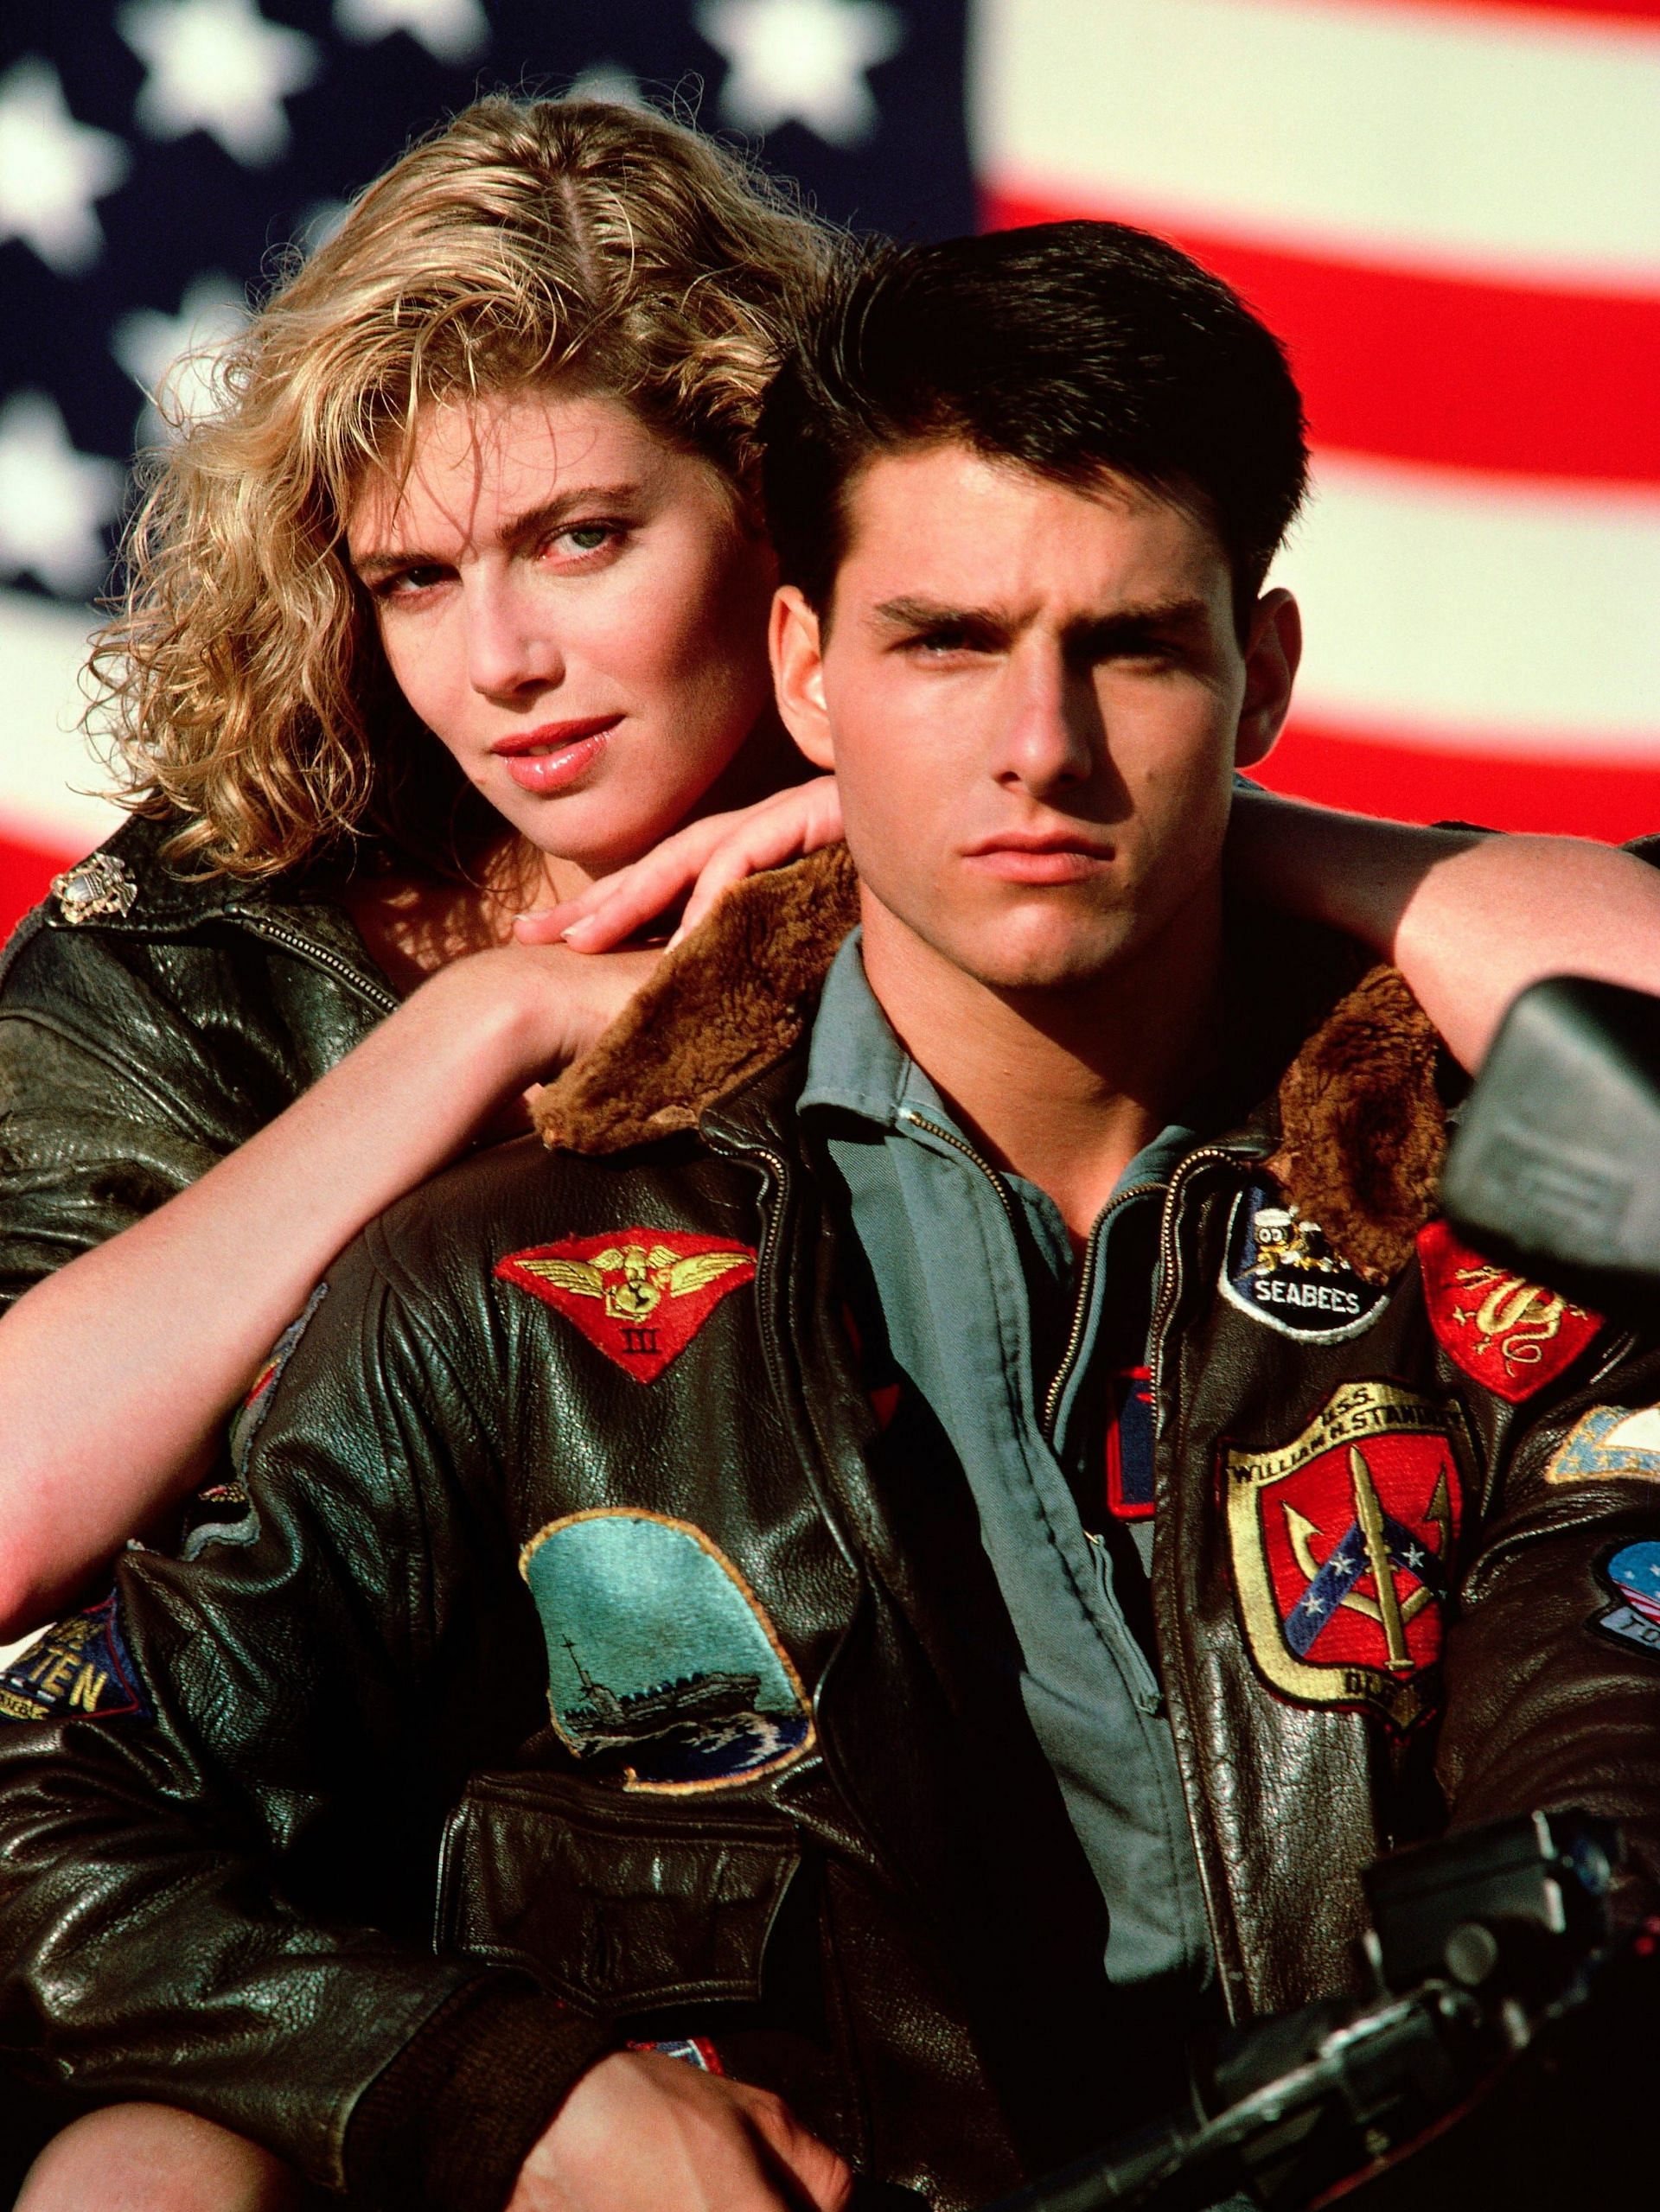 Top Gun portrayed a whirlwind of a romance  (Image via Paramount Pictures)